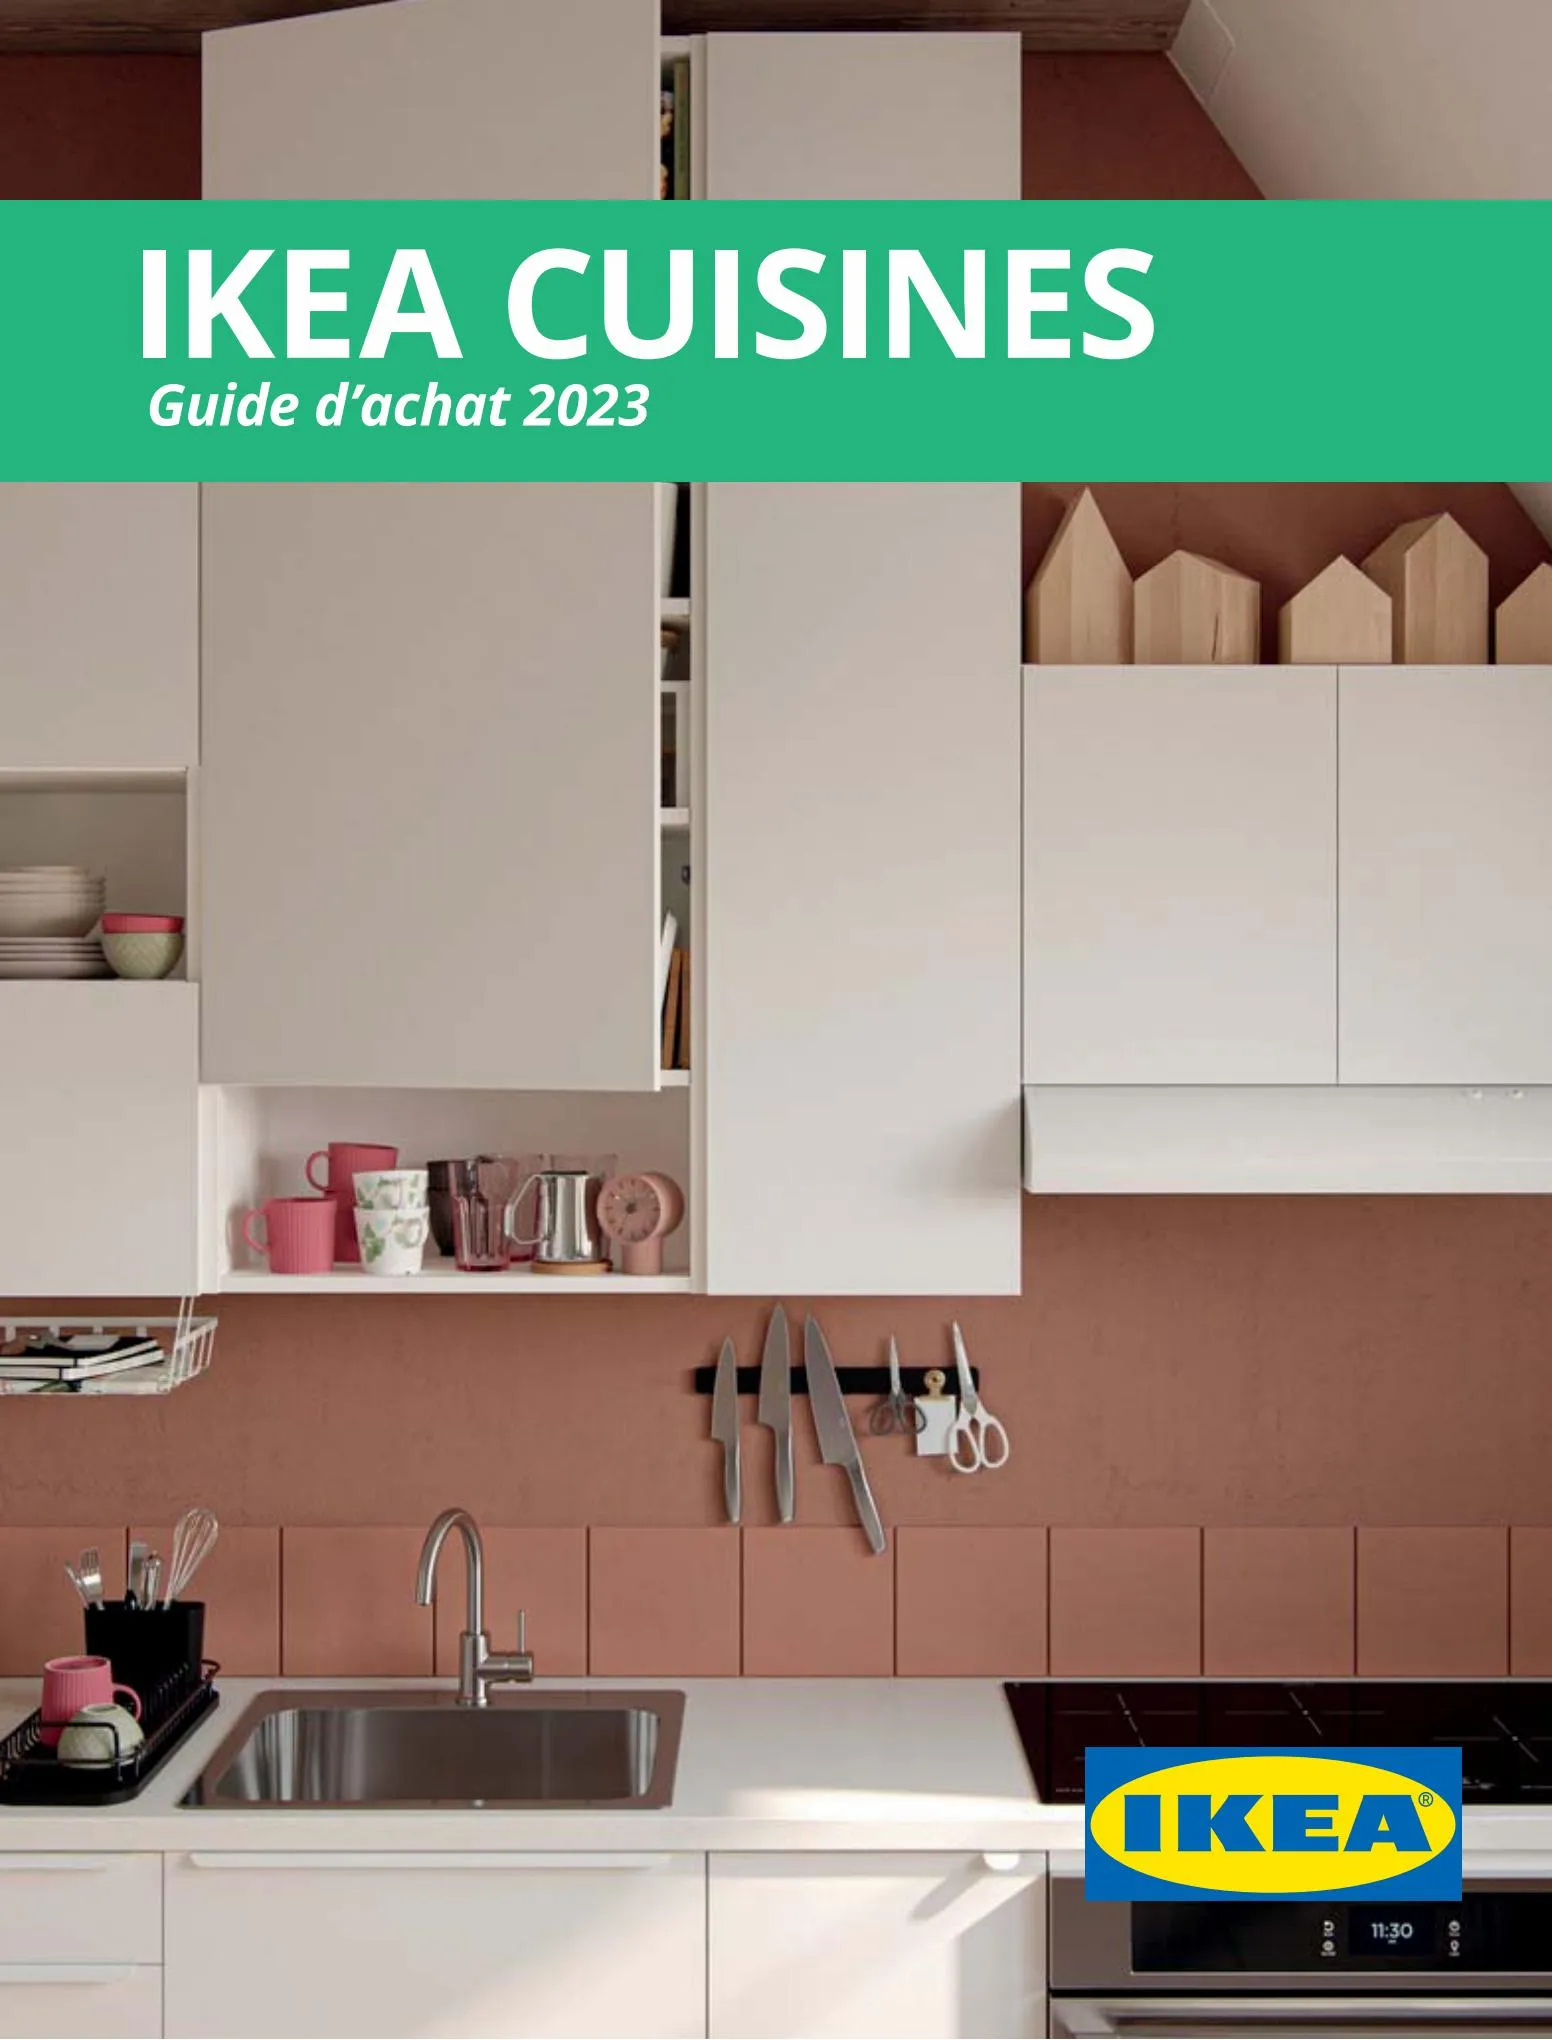 Catalogue IKEA CUISINES Guide d’achat 2023, page 00001